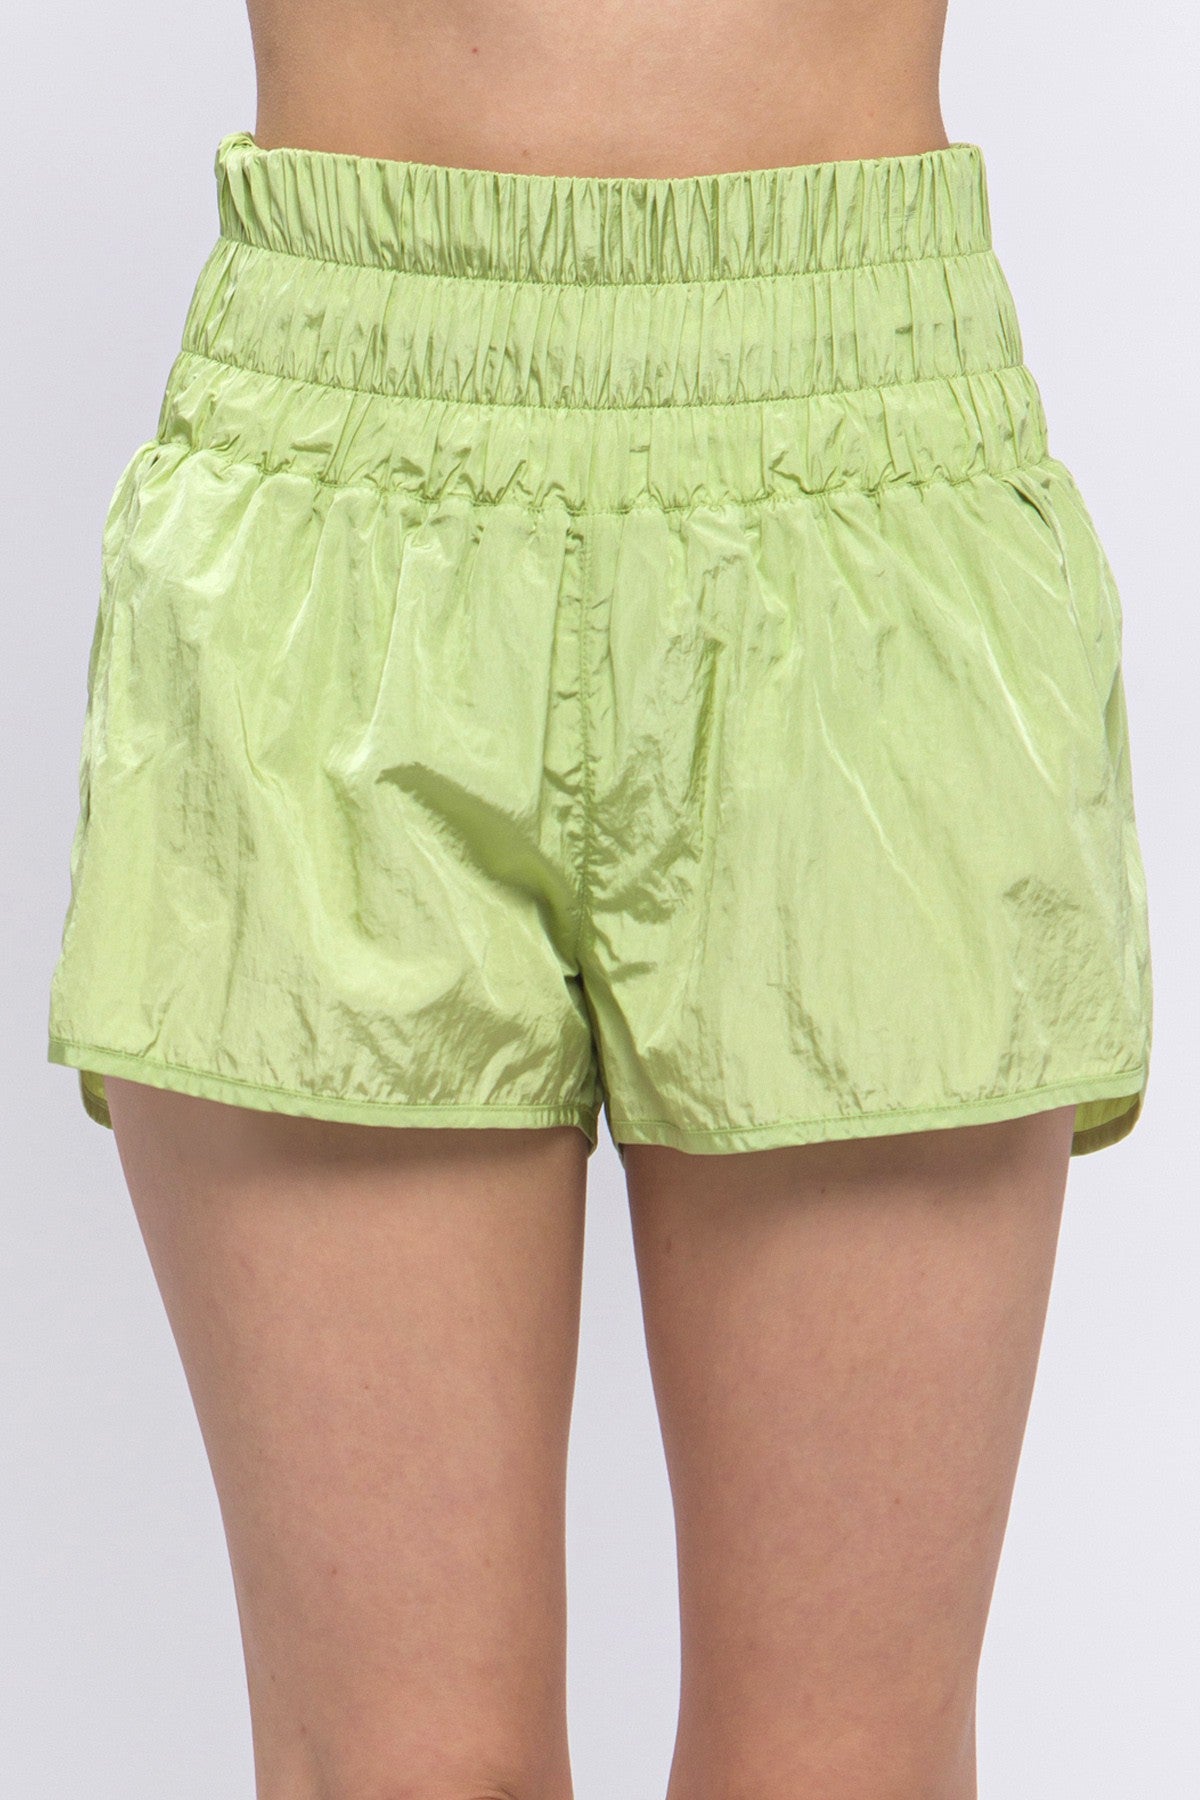 Run With Women Lime Shorts